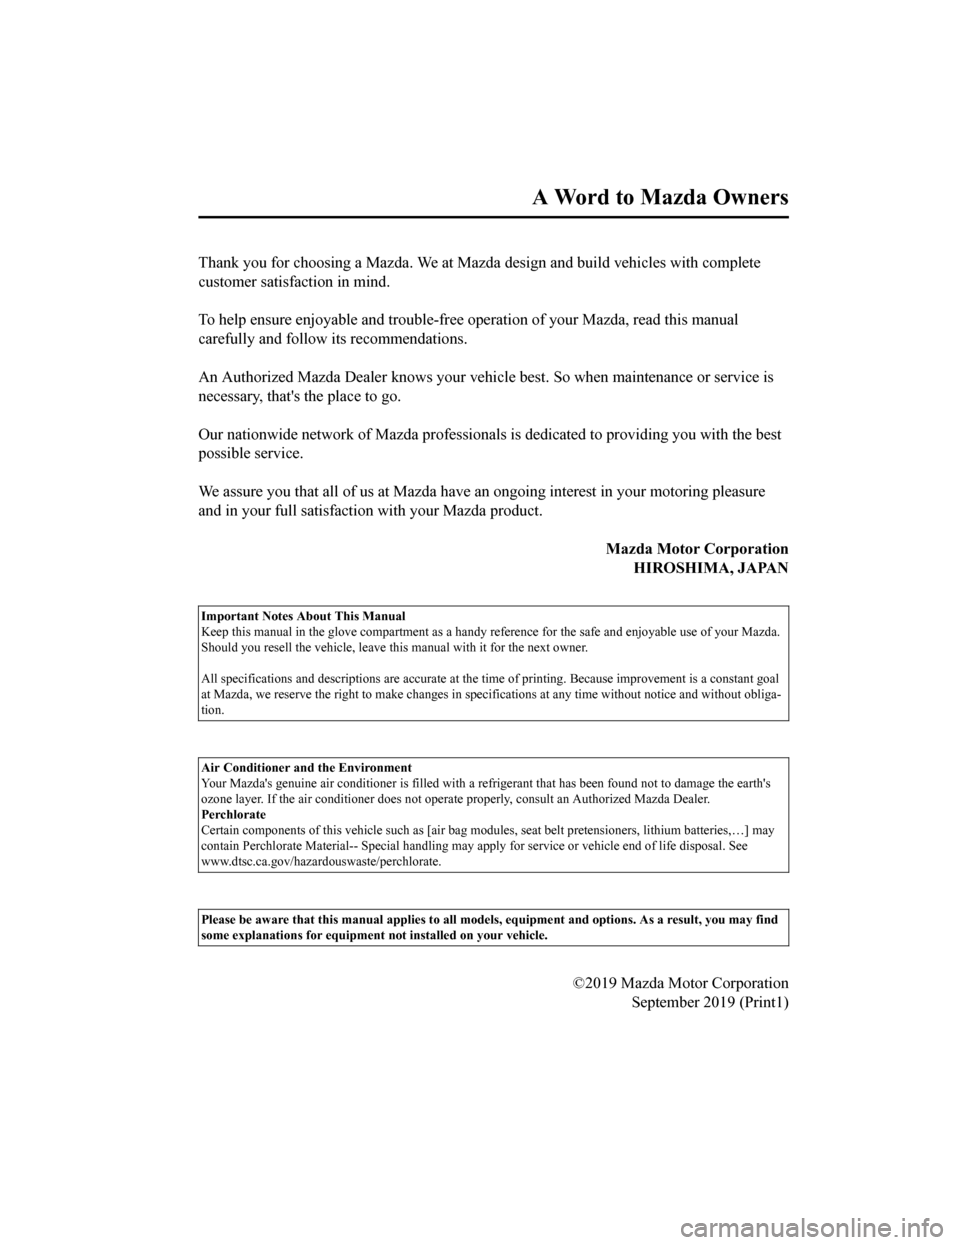 MAZDA MODEL 6 2020  Owners Manual (in English) Thank you for choosing a Mazda. We at Mazda design and build vehicles with complete
customer satisfaction in mind.
 
To help ensure enjoyable and trouble-free operation of your Mazda, read this manual